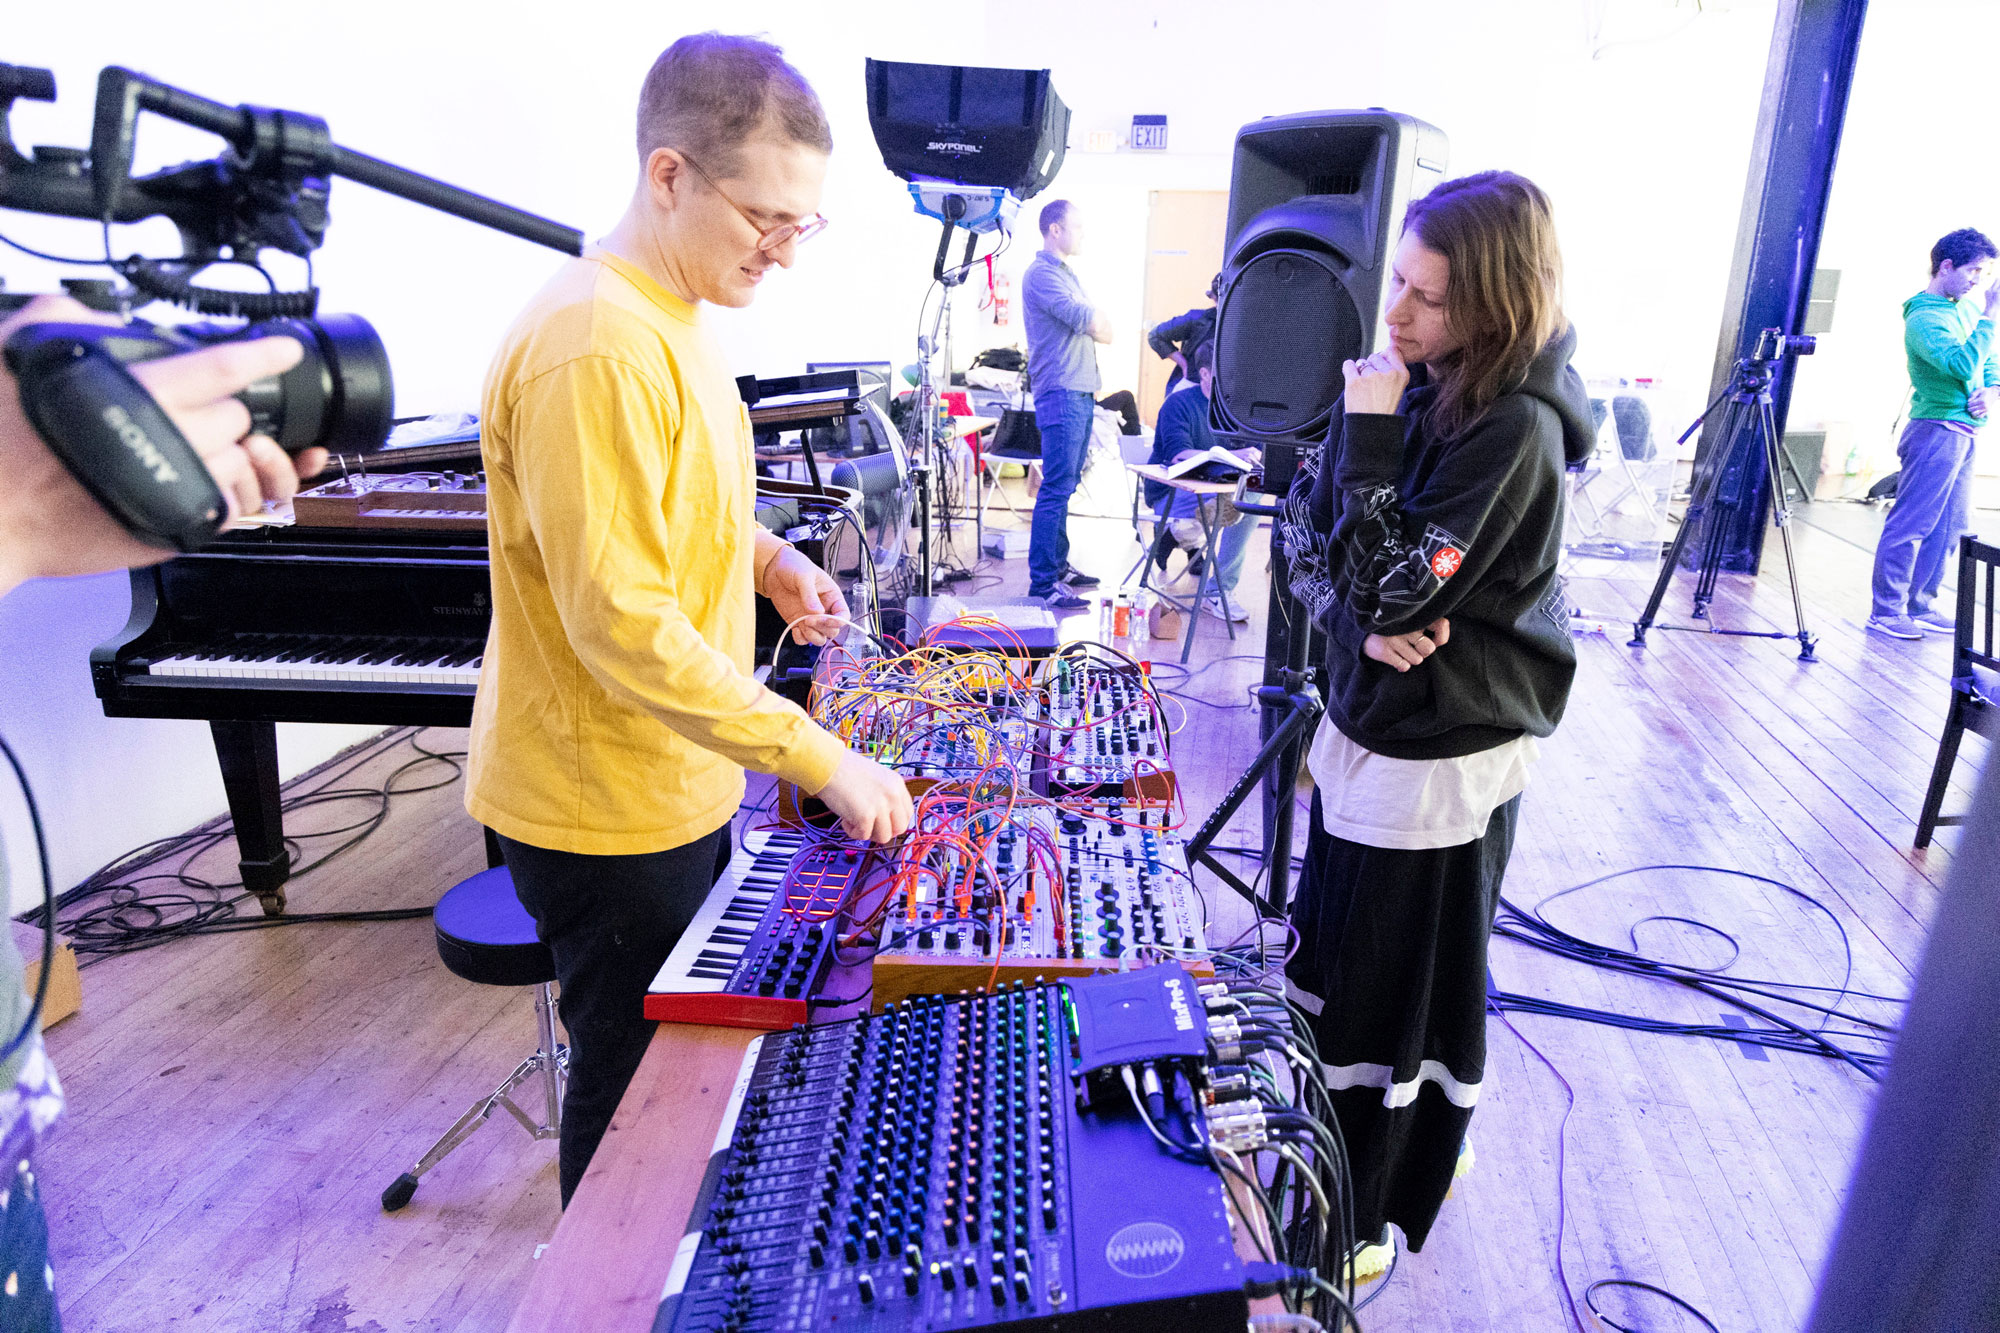 Person in yellow shirt and person in black hoodie stand over synthesizer covered in many colored cables